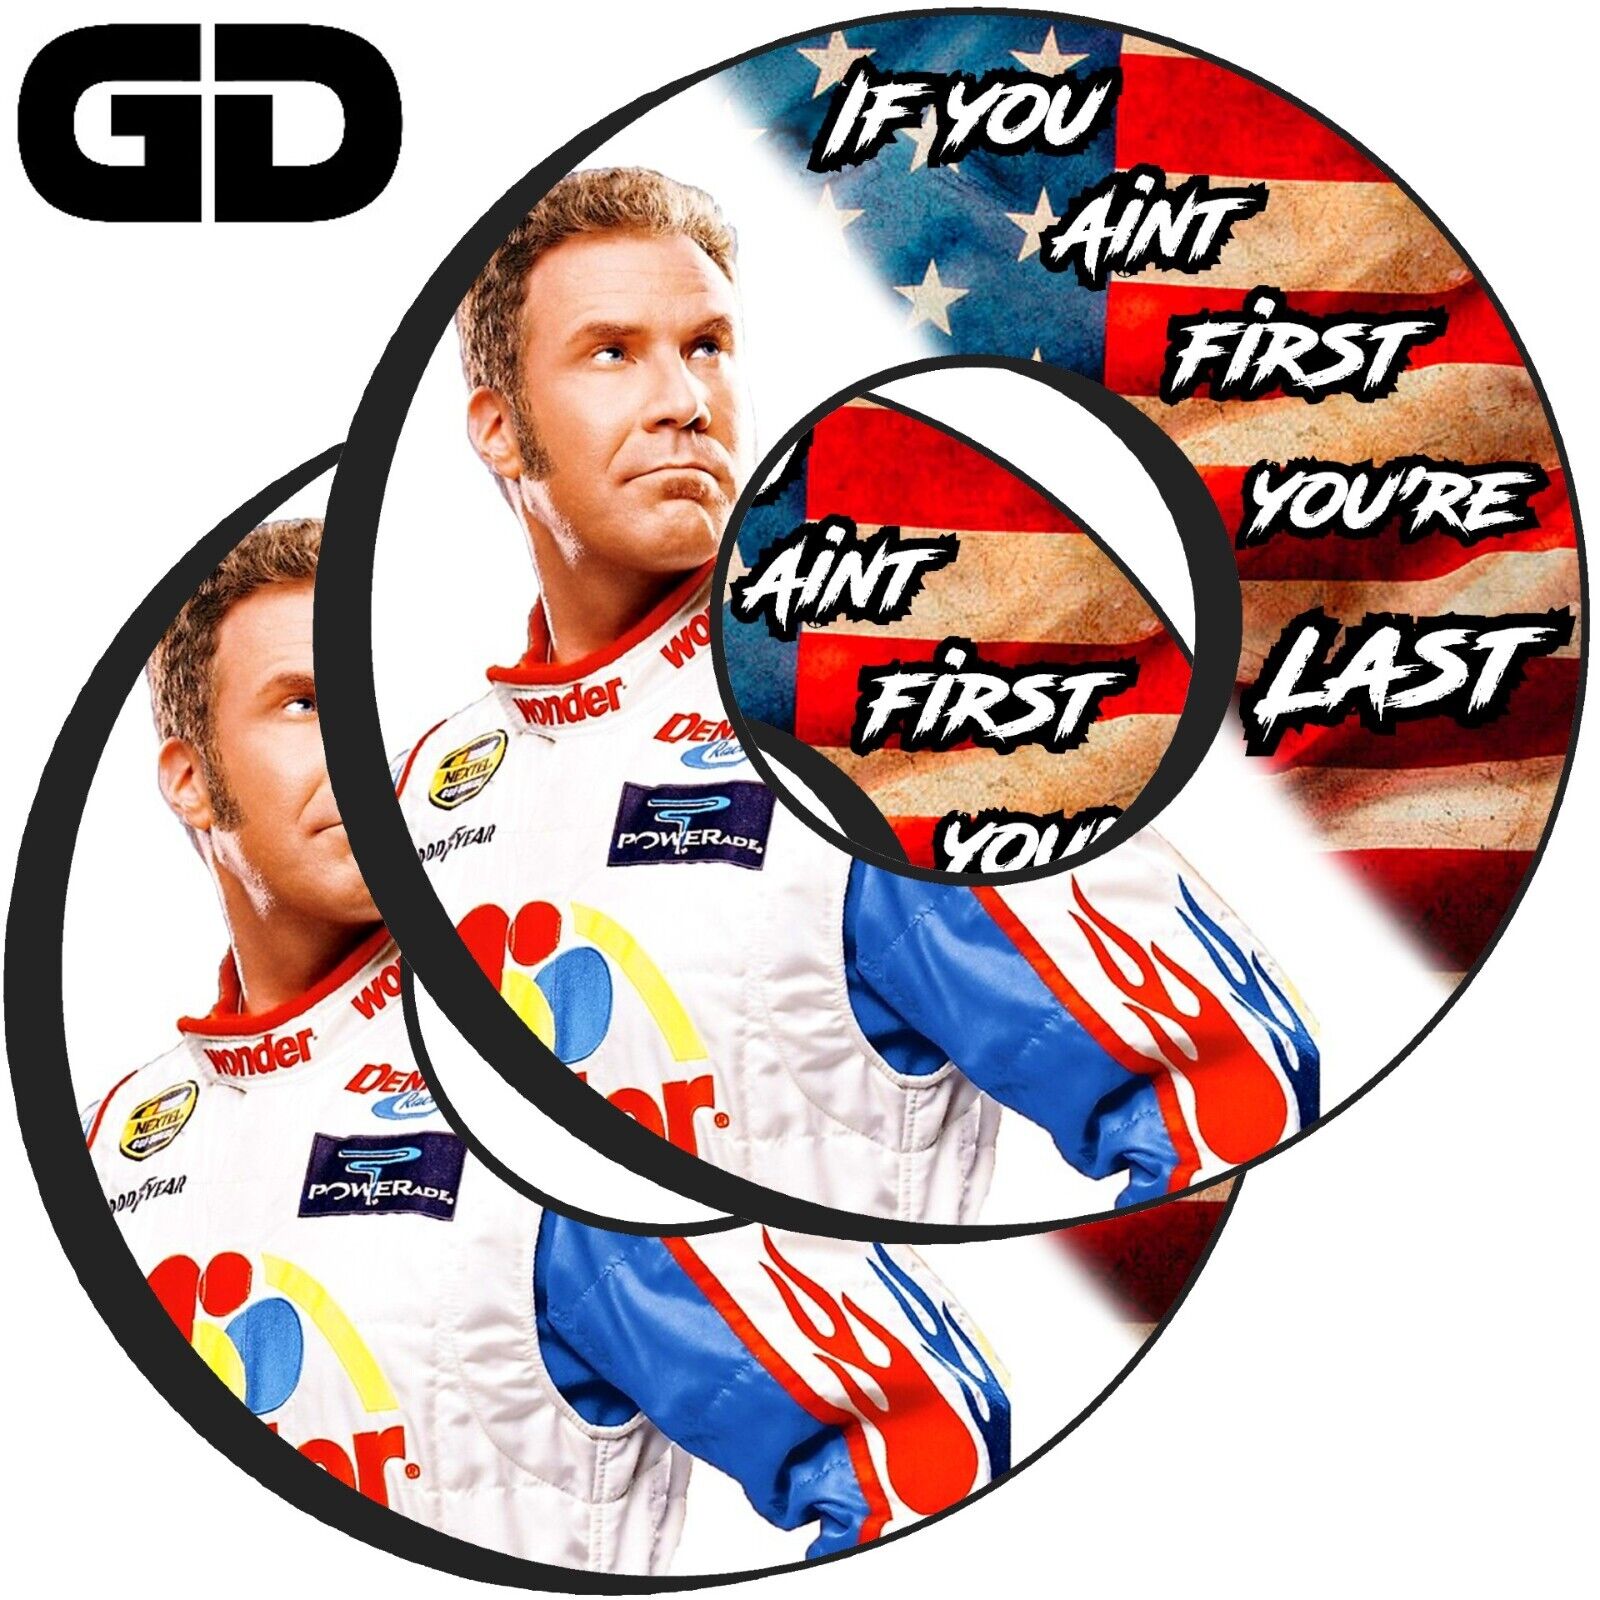 GripDonuts.com® Premium Grip Donuts for Dirt Bike Motorcycle BMX - Ricky Bobby